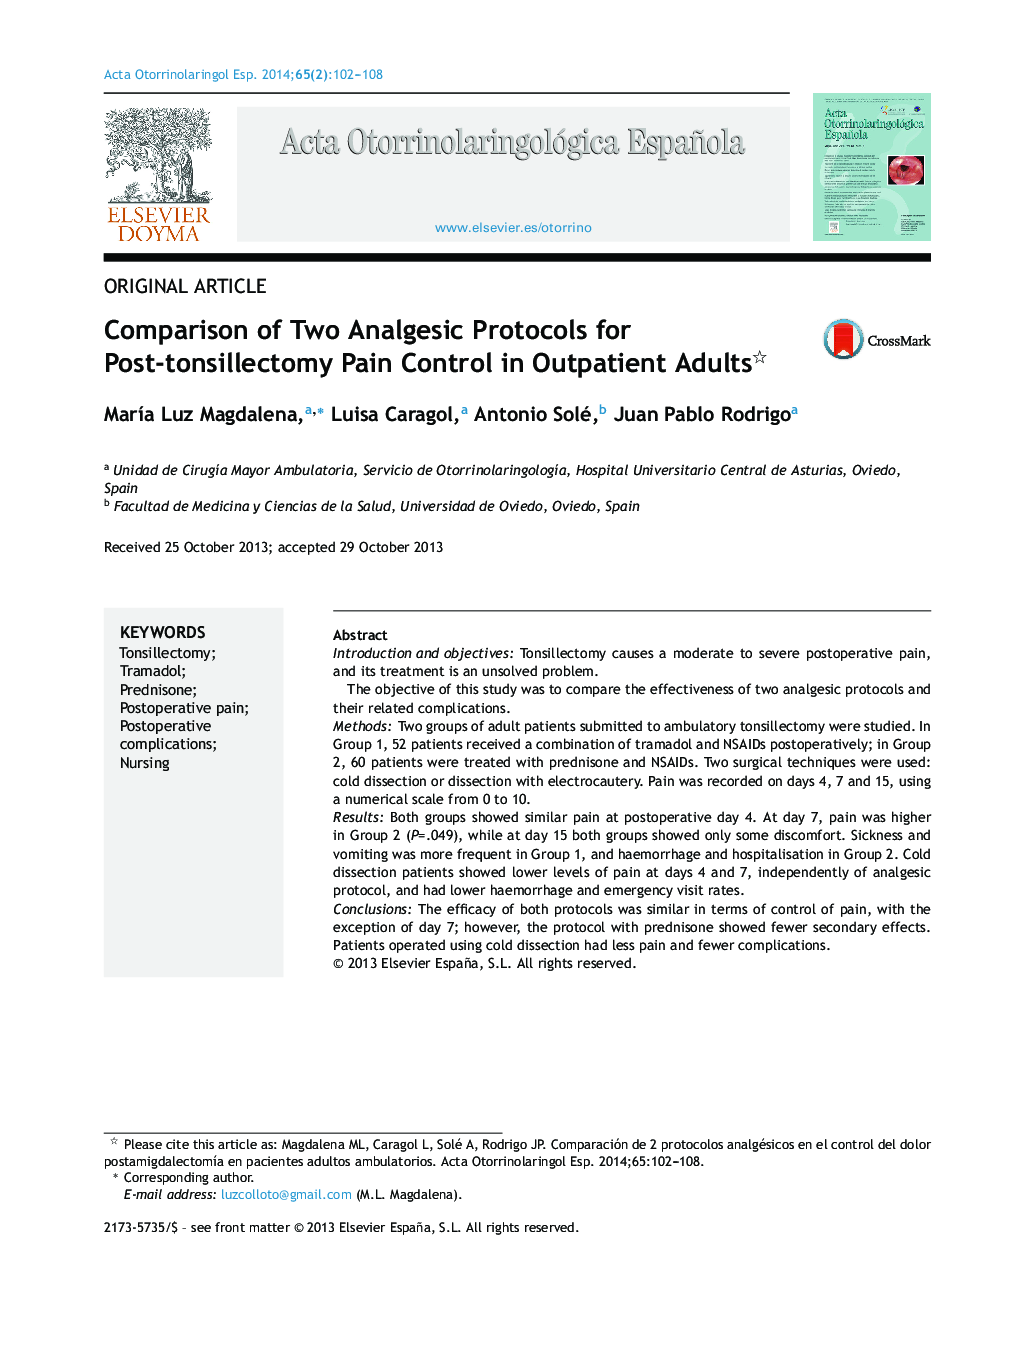 Comparison of Two Analgesic Protocols for Post-tonsillectomy Pain Control in Outpatient Adults 